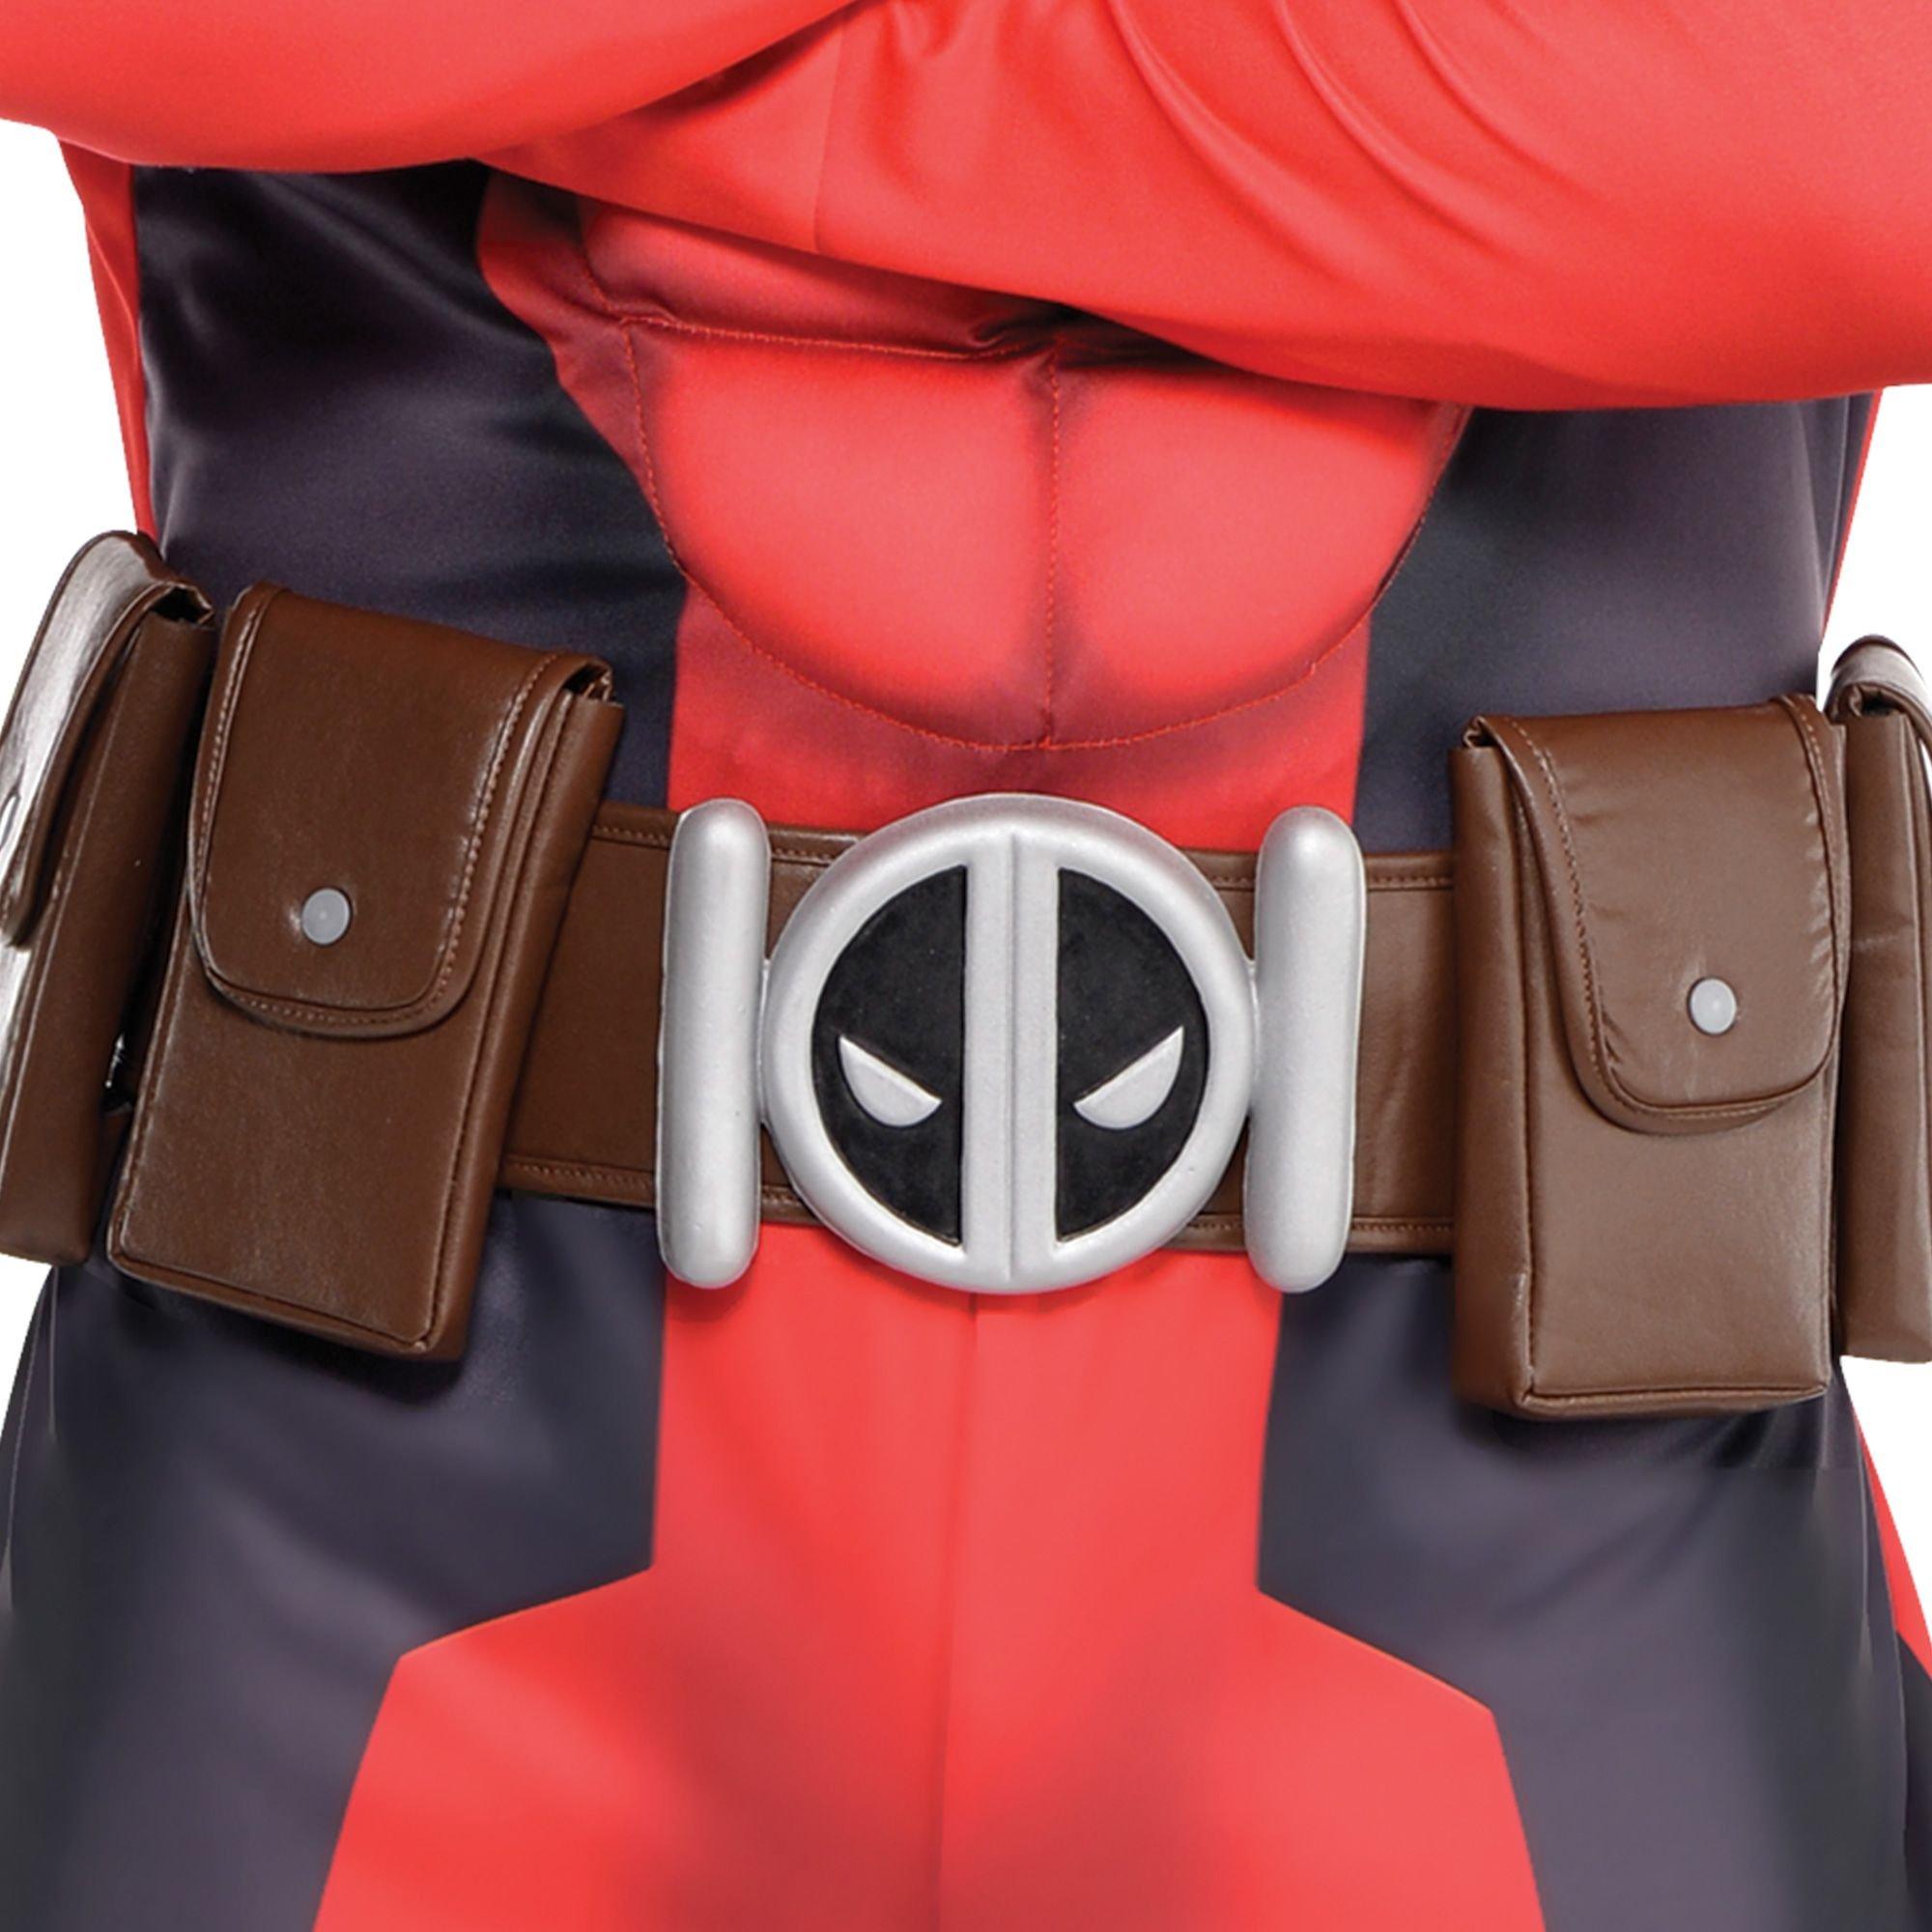 Adult Deadpool Muscle Costume | Party City